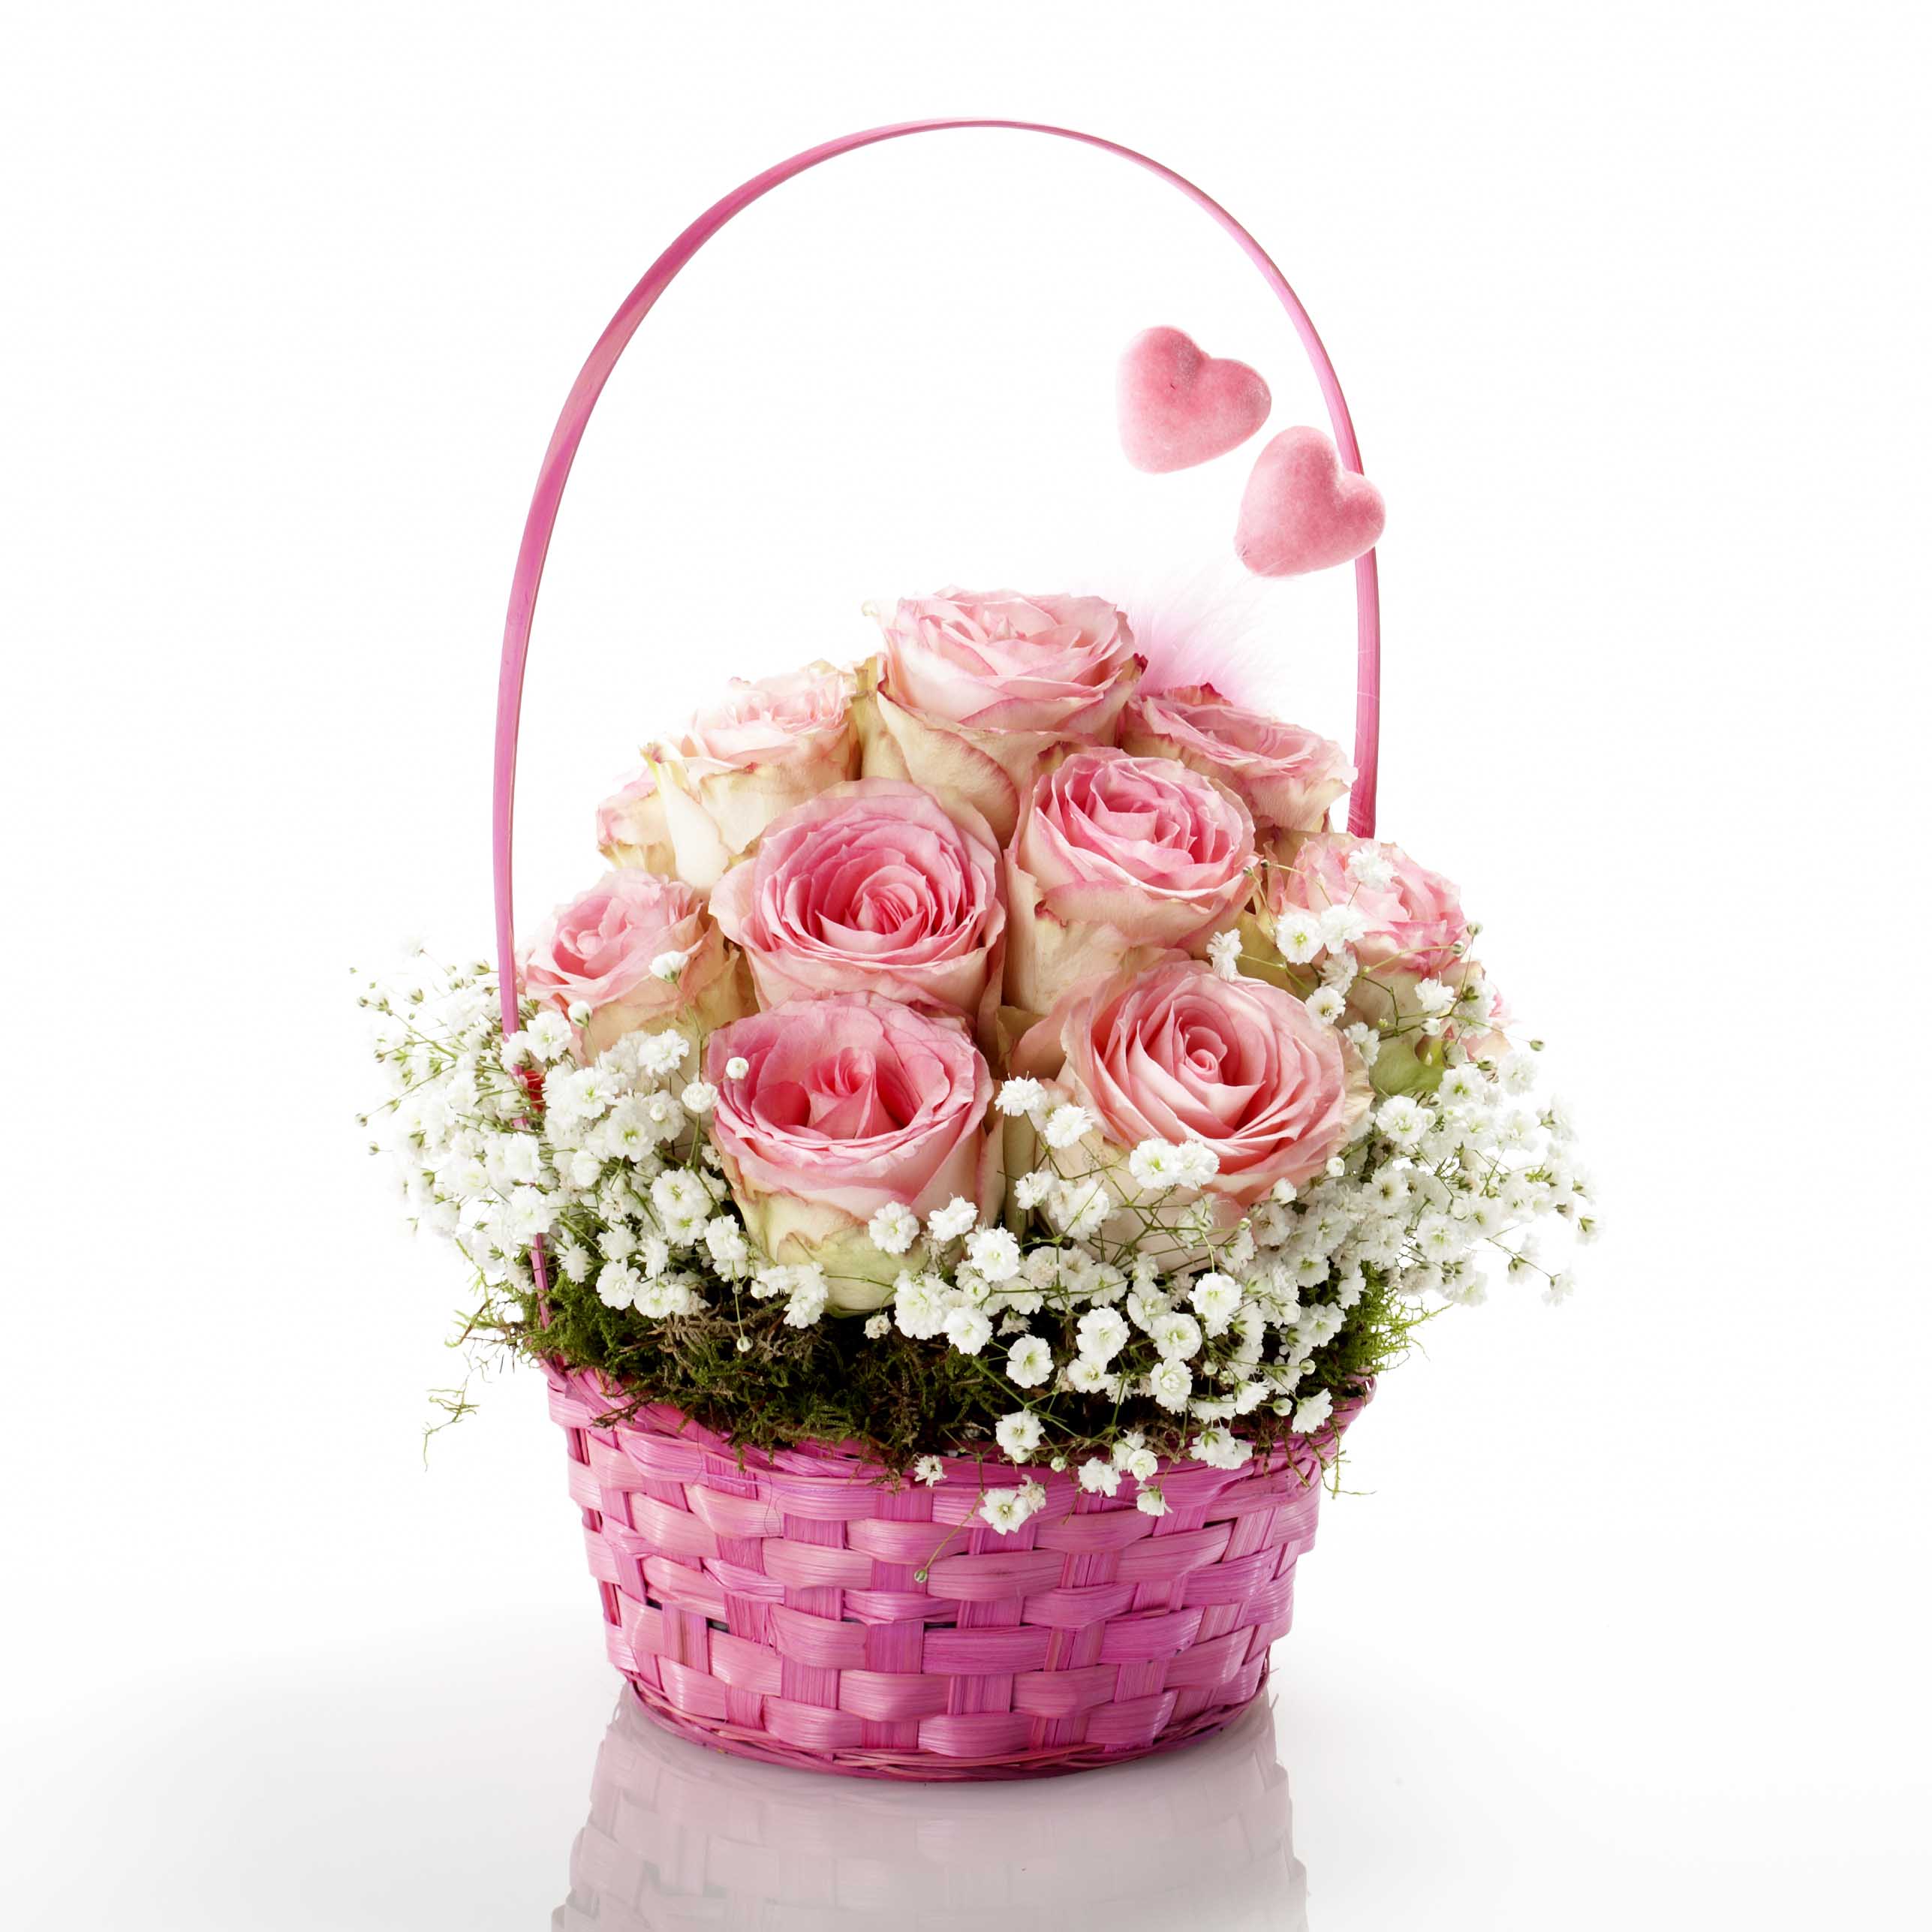 My love basket in pink